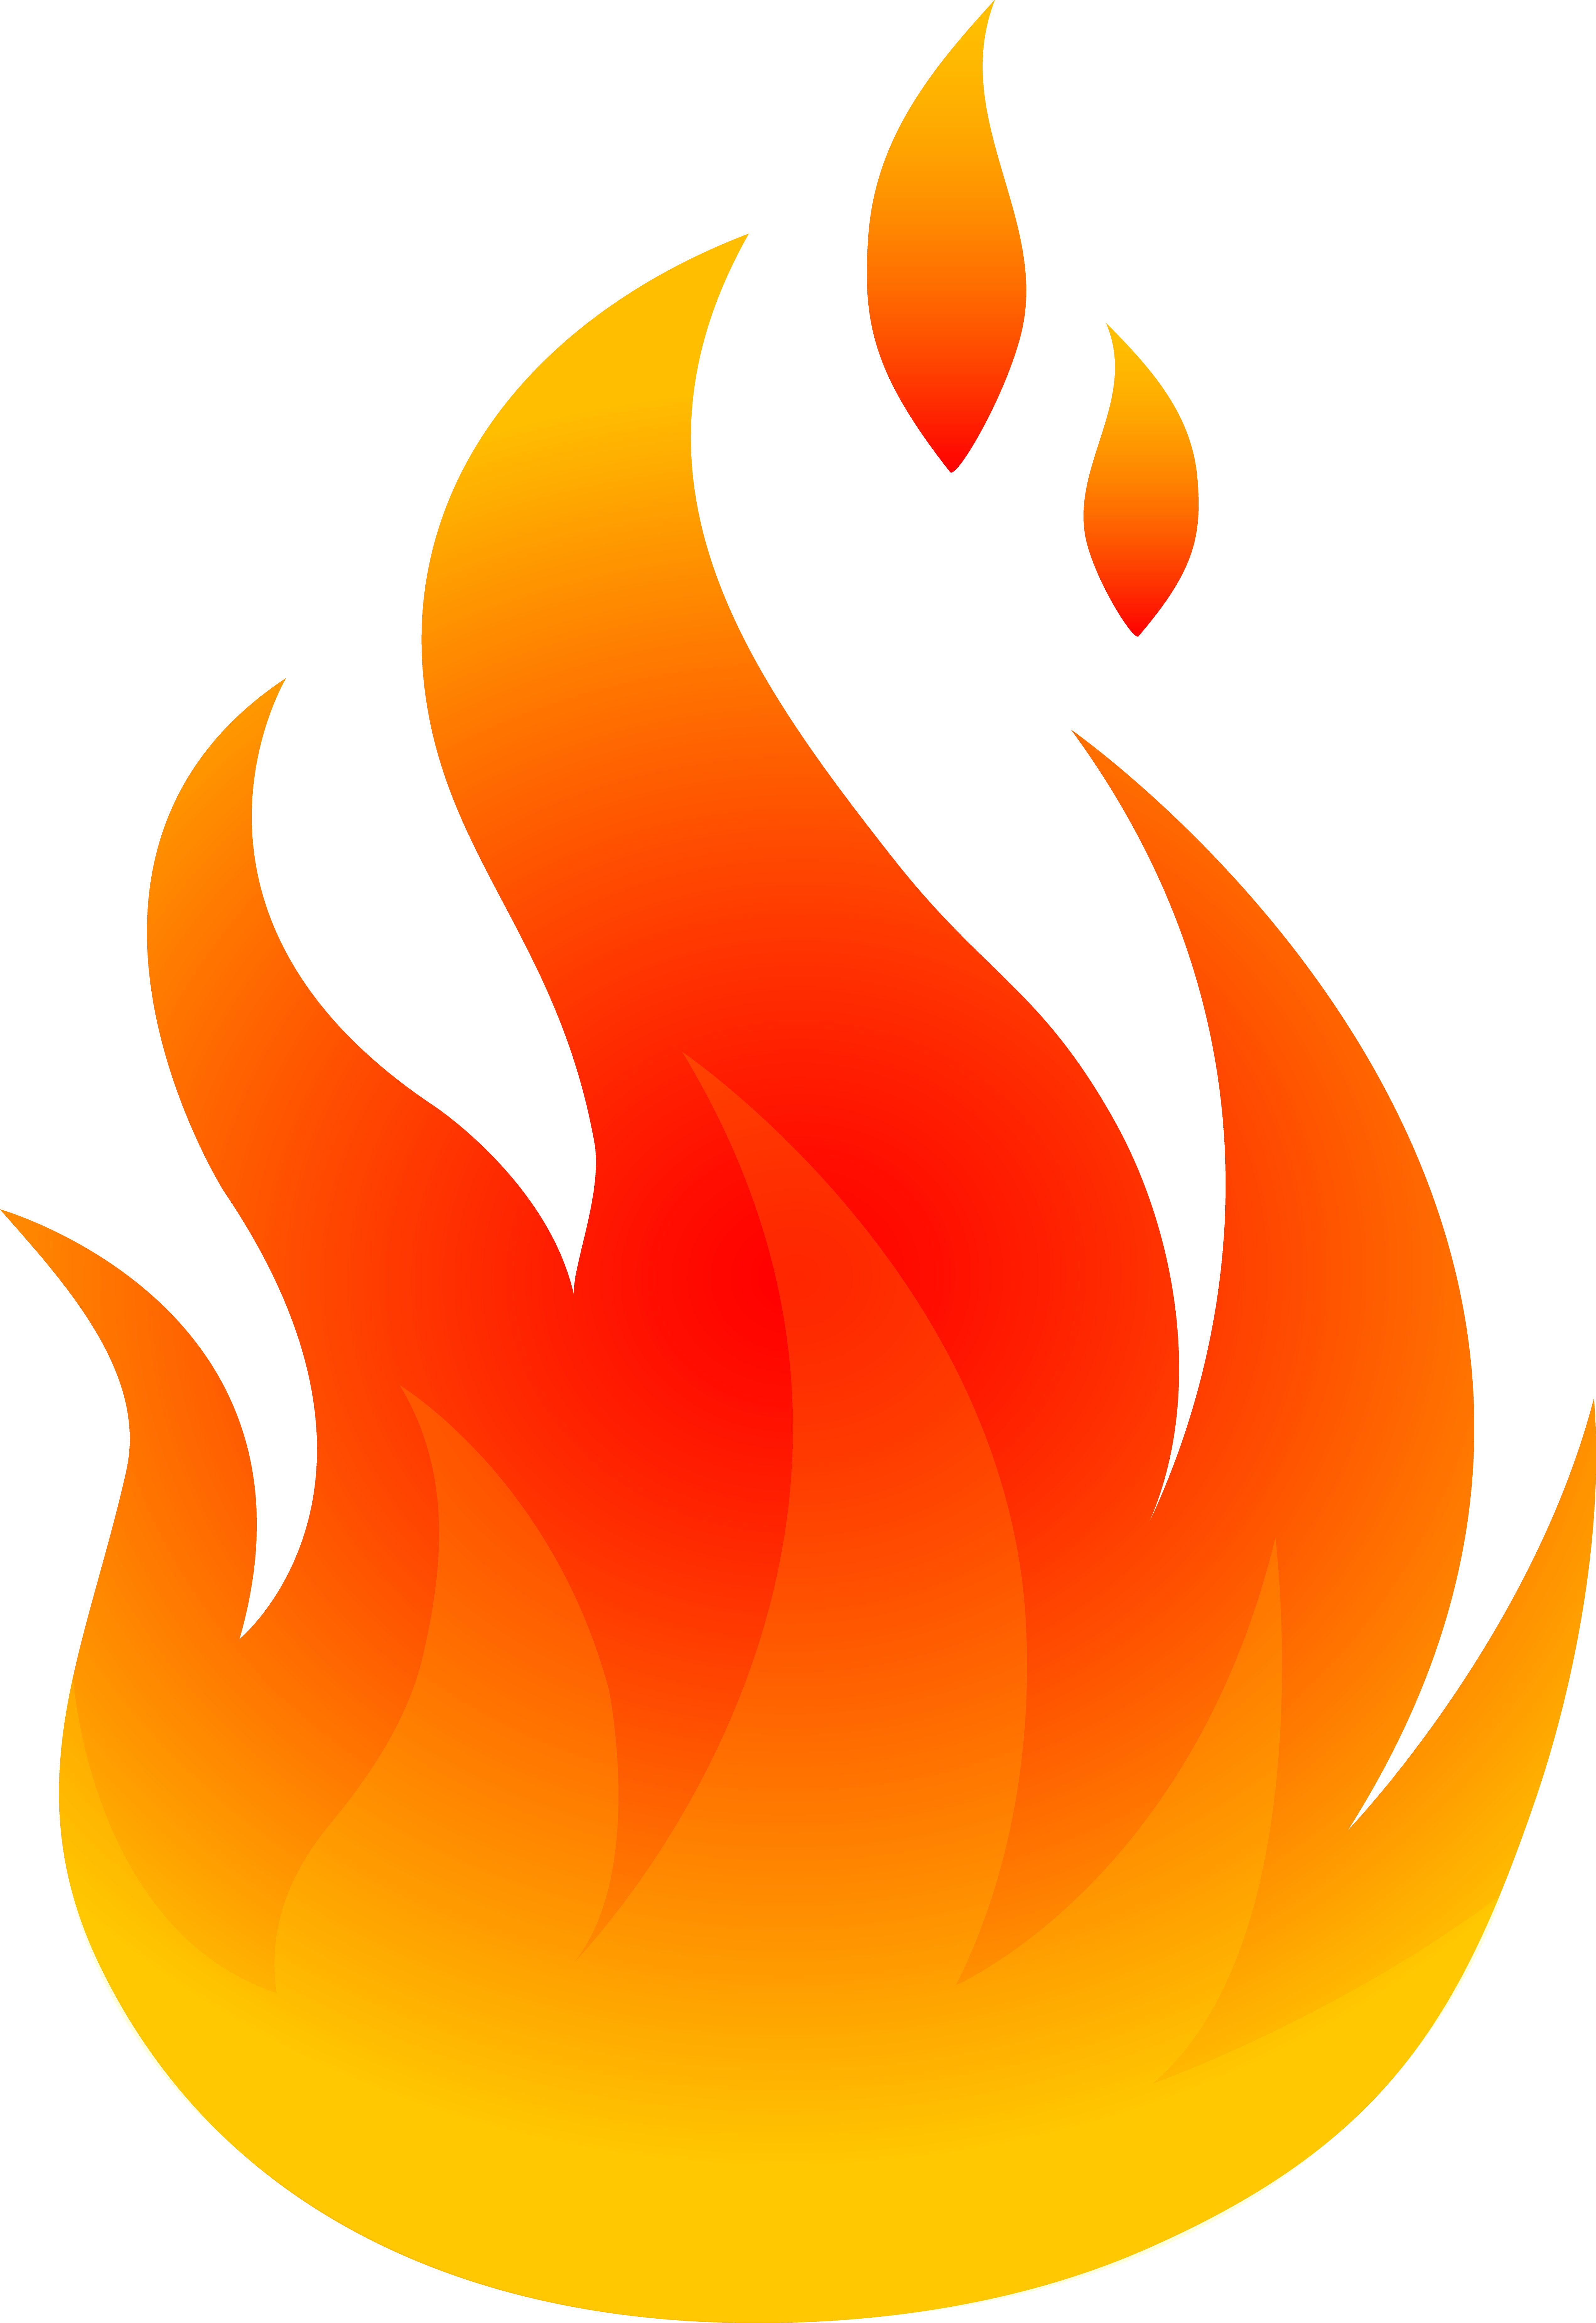 Best Photos of Free Flame Graphics - Fire Flames Clip Art, Flame ...